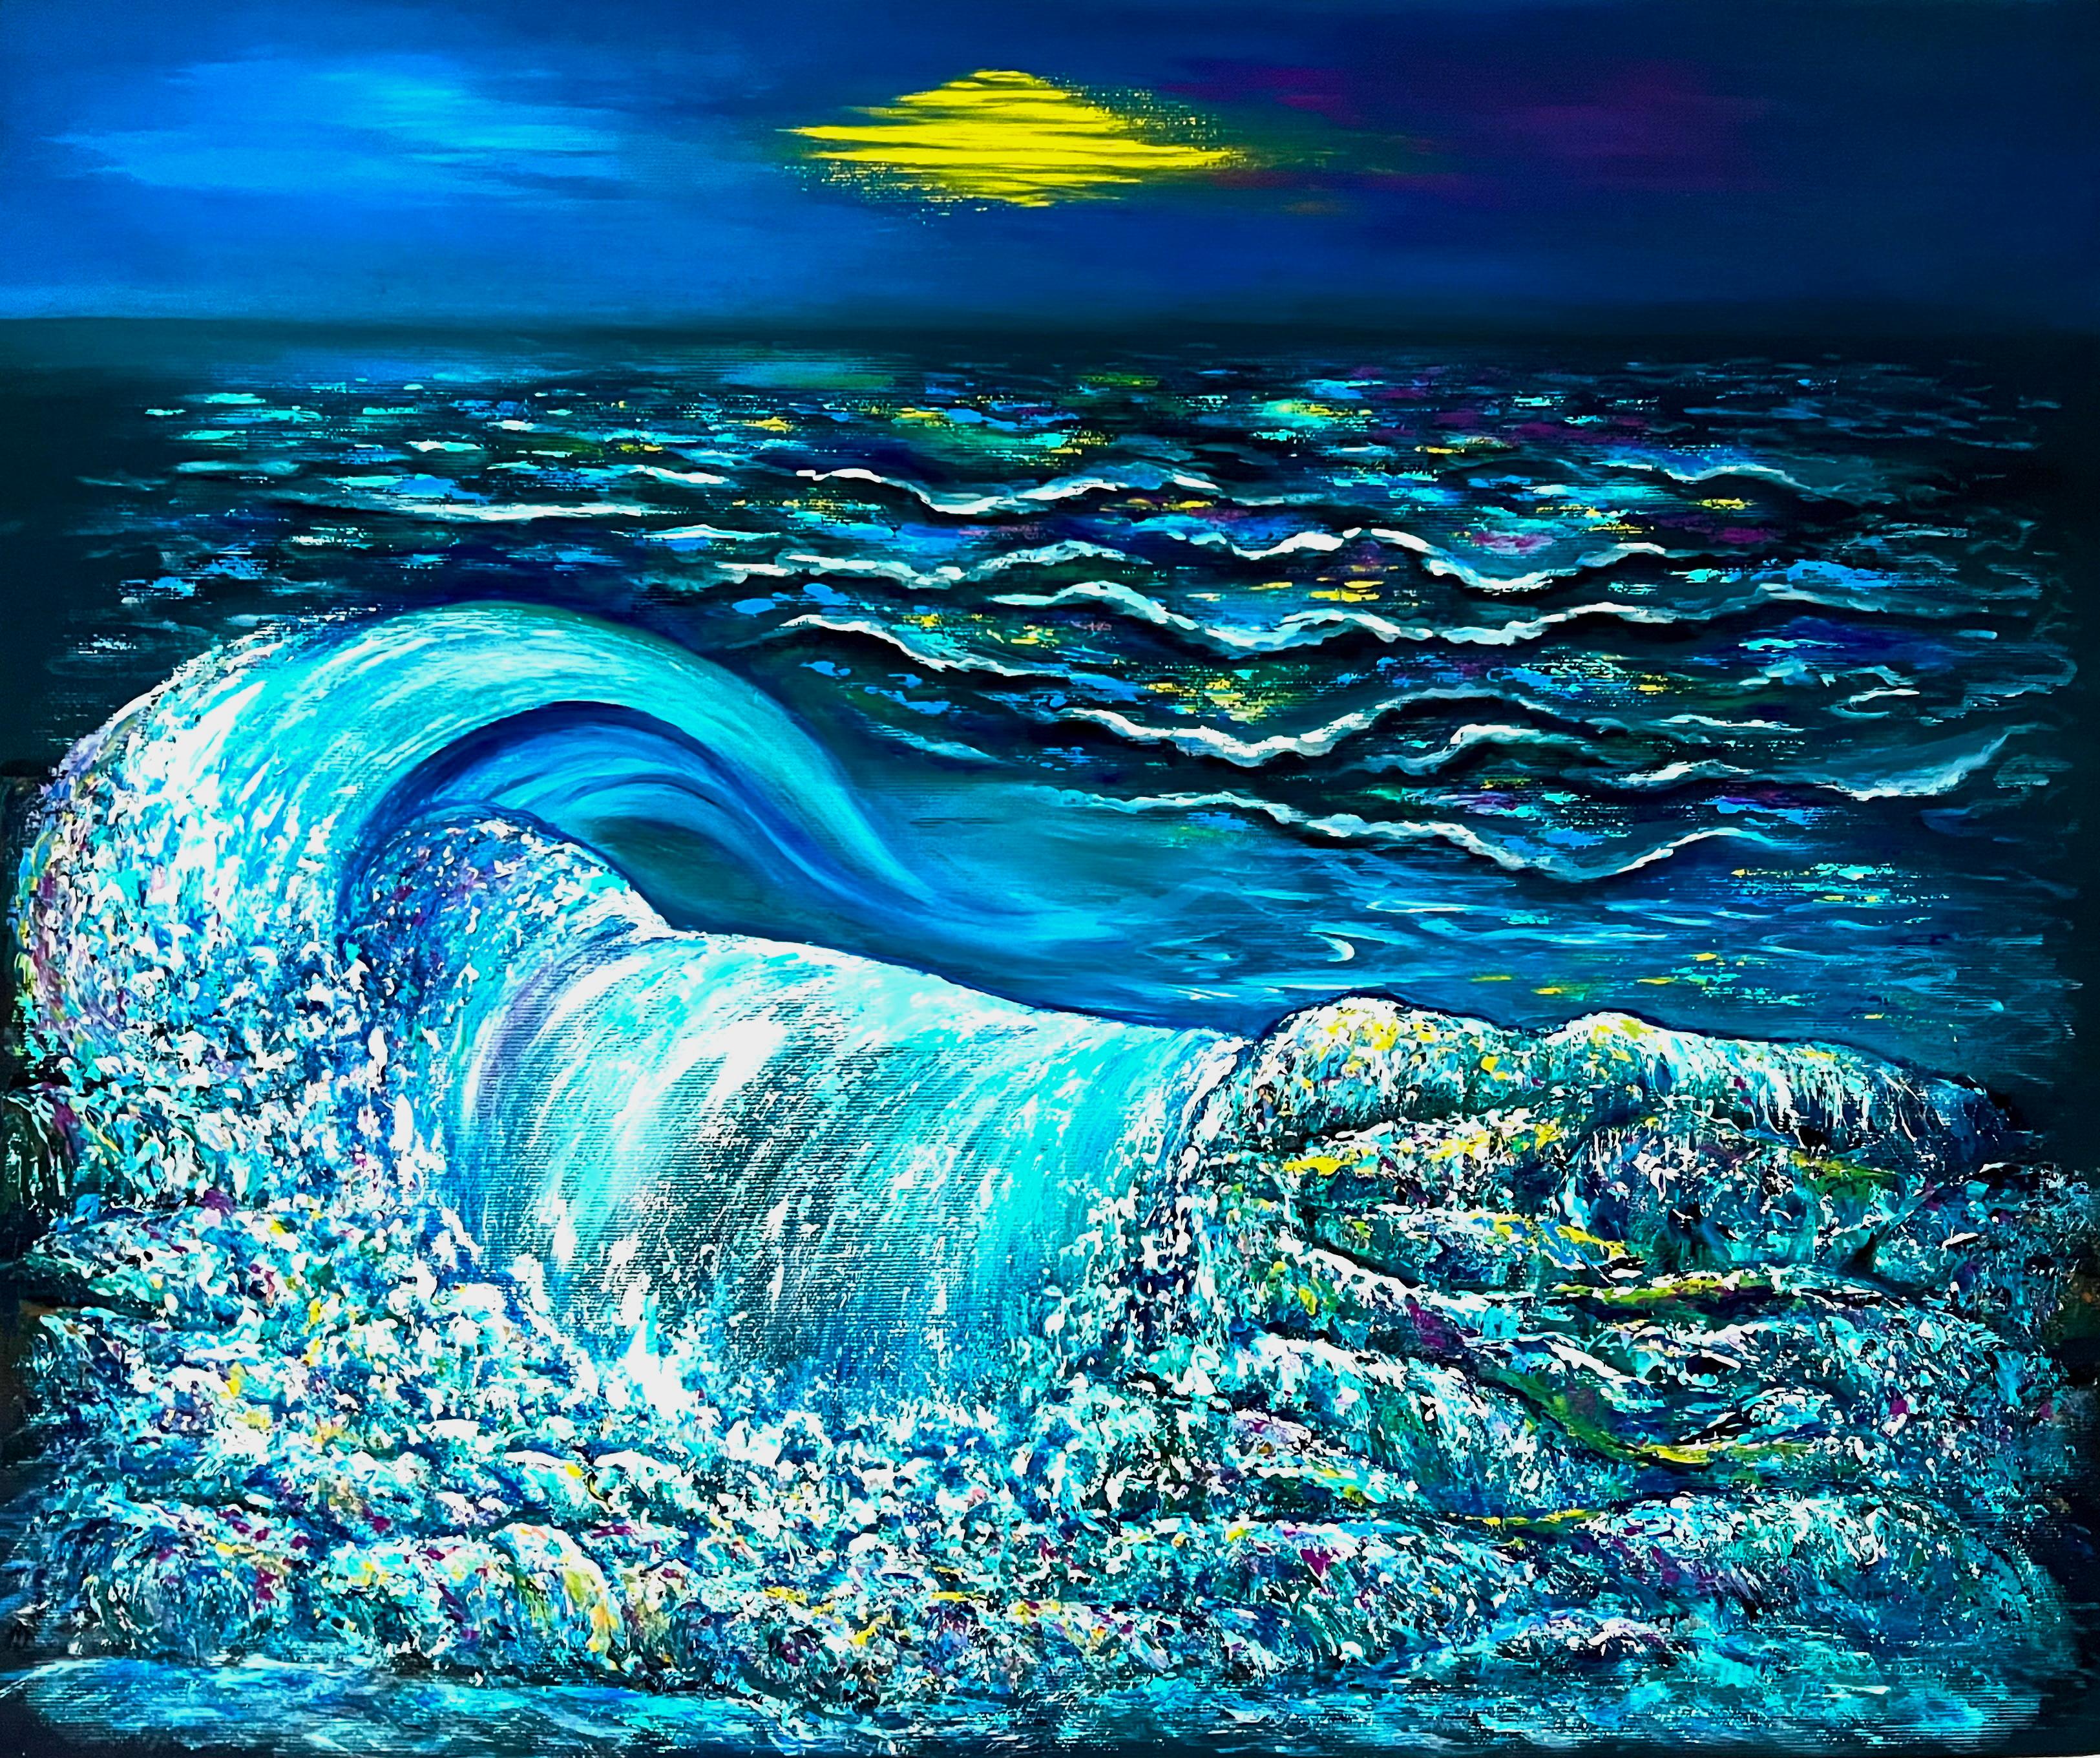 Vik Schroeder  Interior Painting -  Peaceful Evening. Oil painting, Impressionist style. Sea / Waves / Water/ Moon.